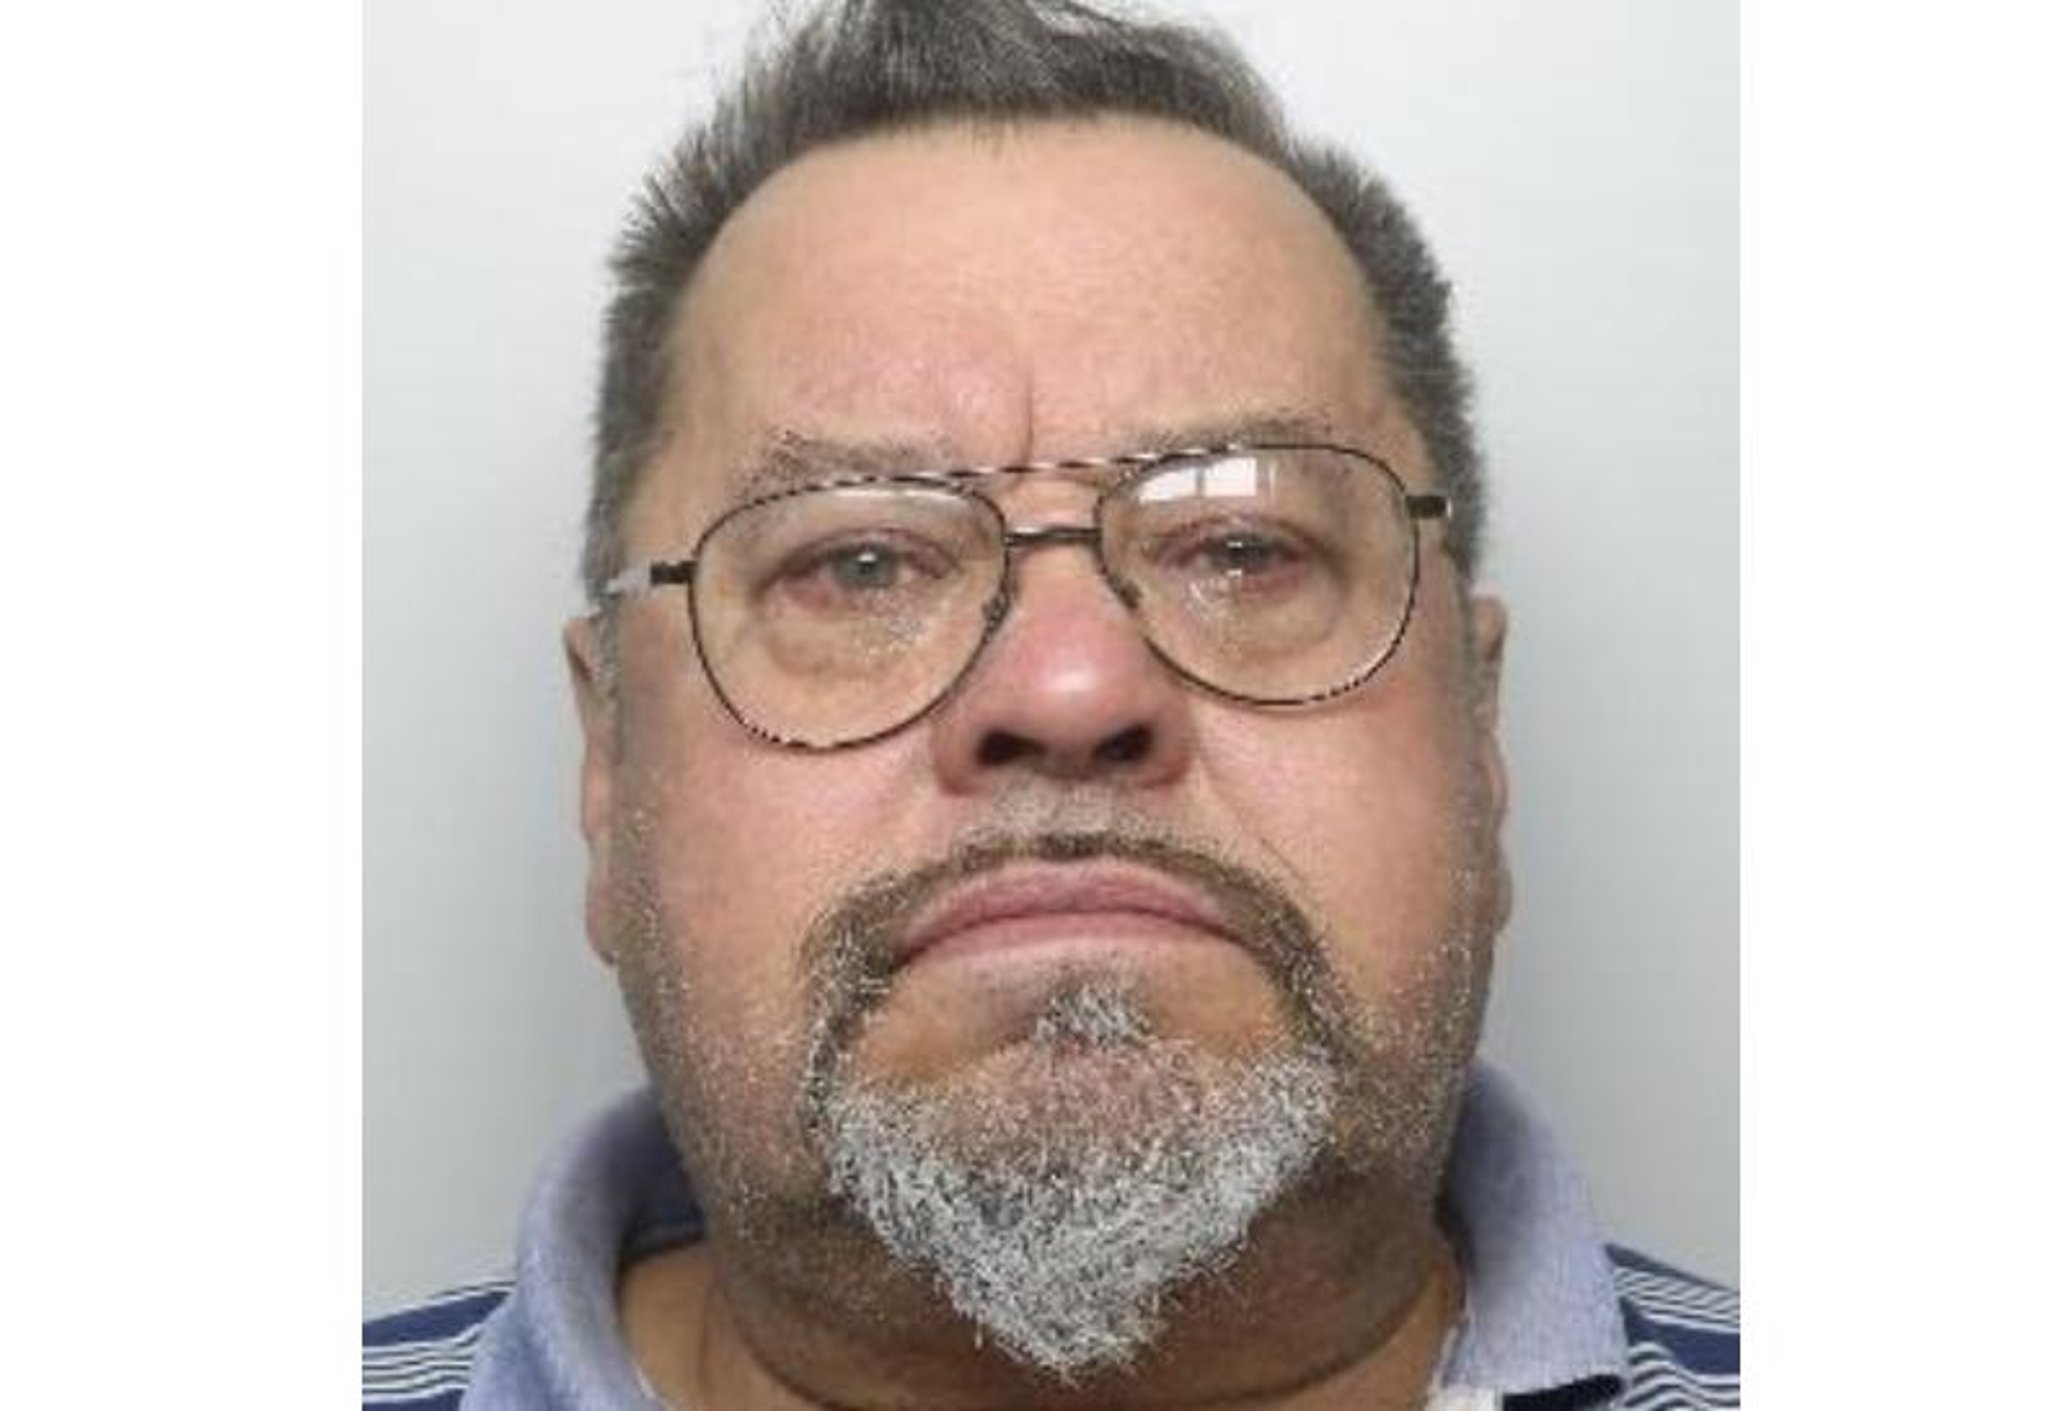 Doncaster Pervert Jailed For 14 Years After Teachers